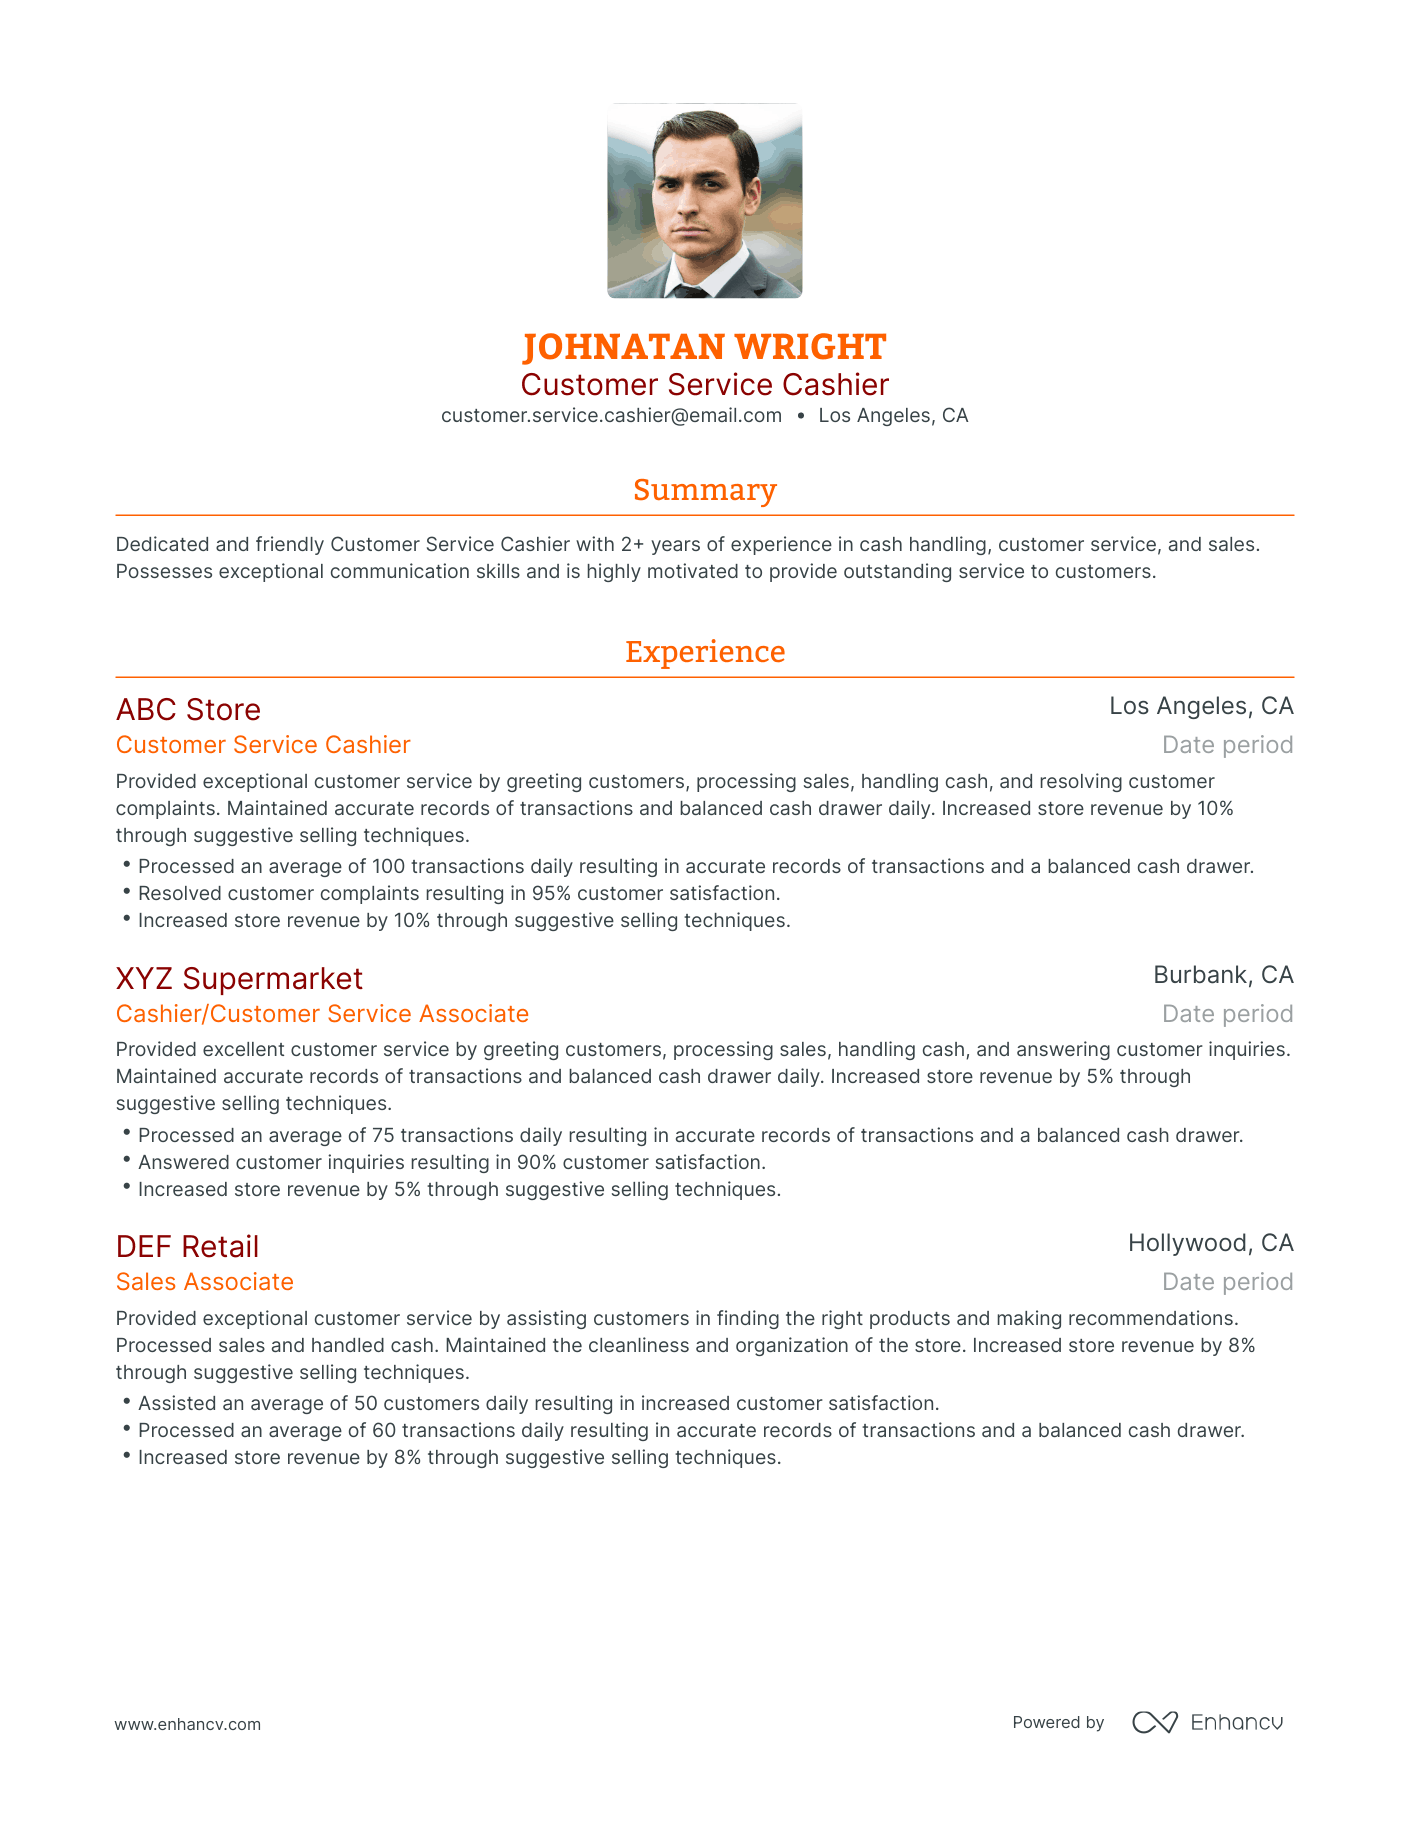 Traditional Customer Service Cashier Resume Template